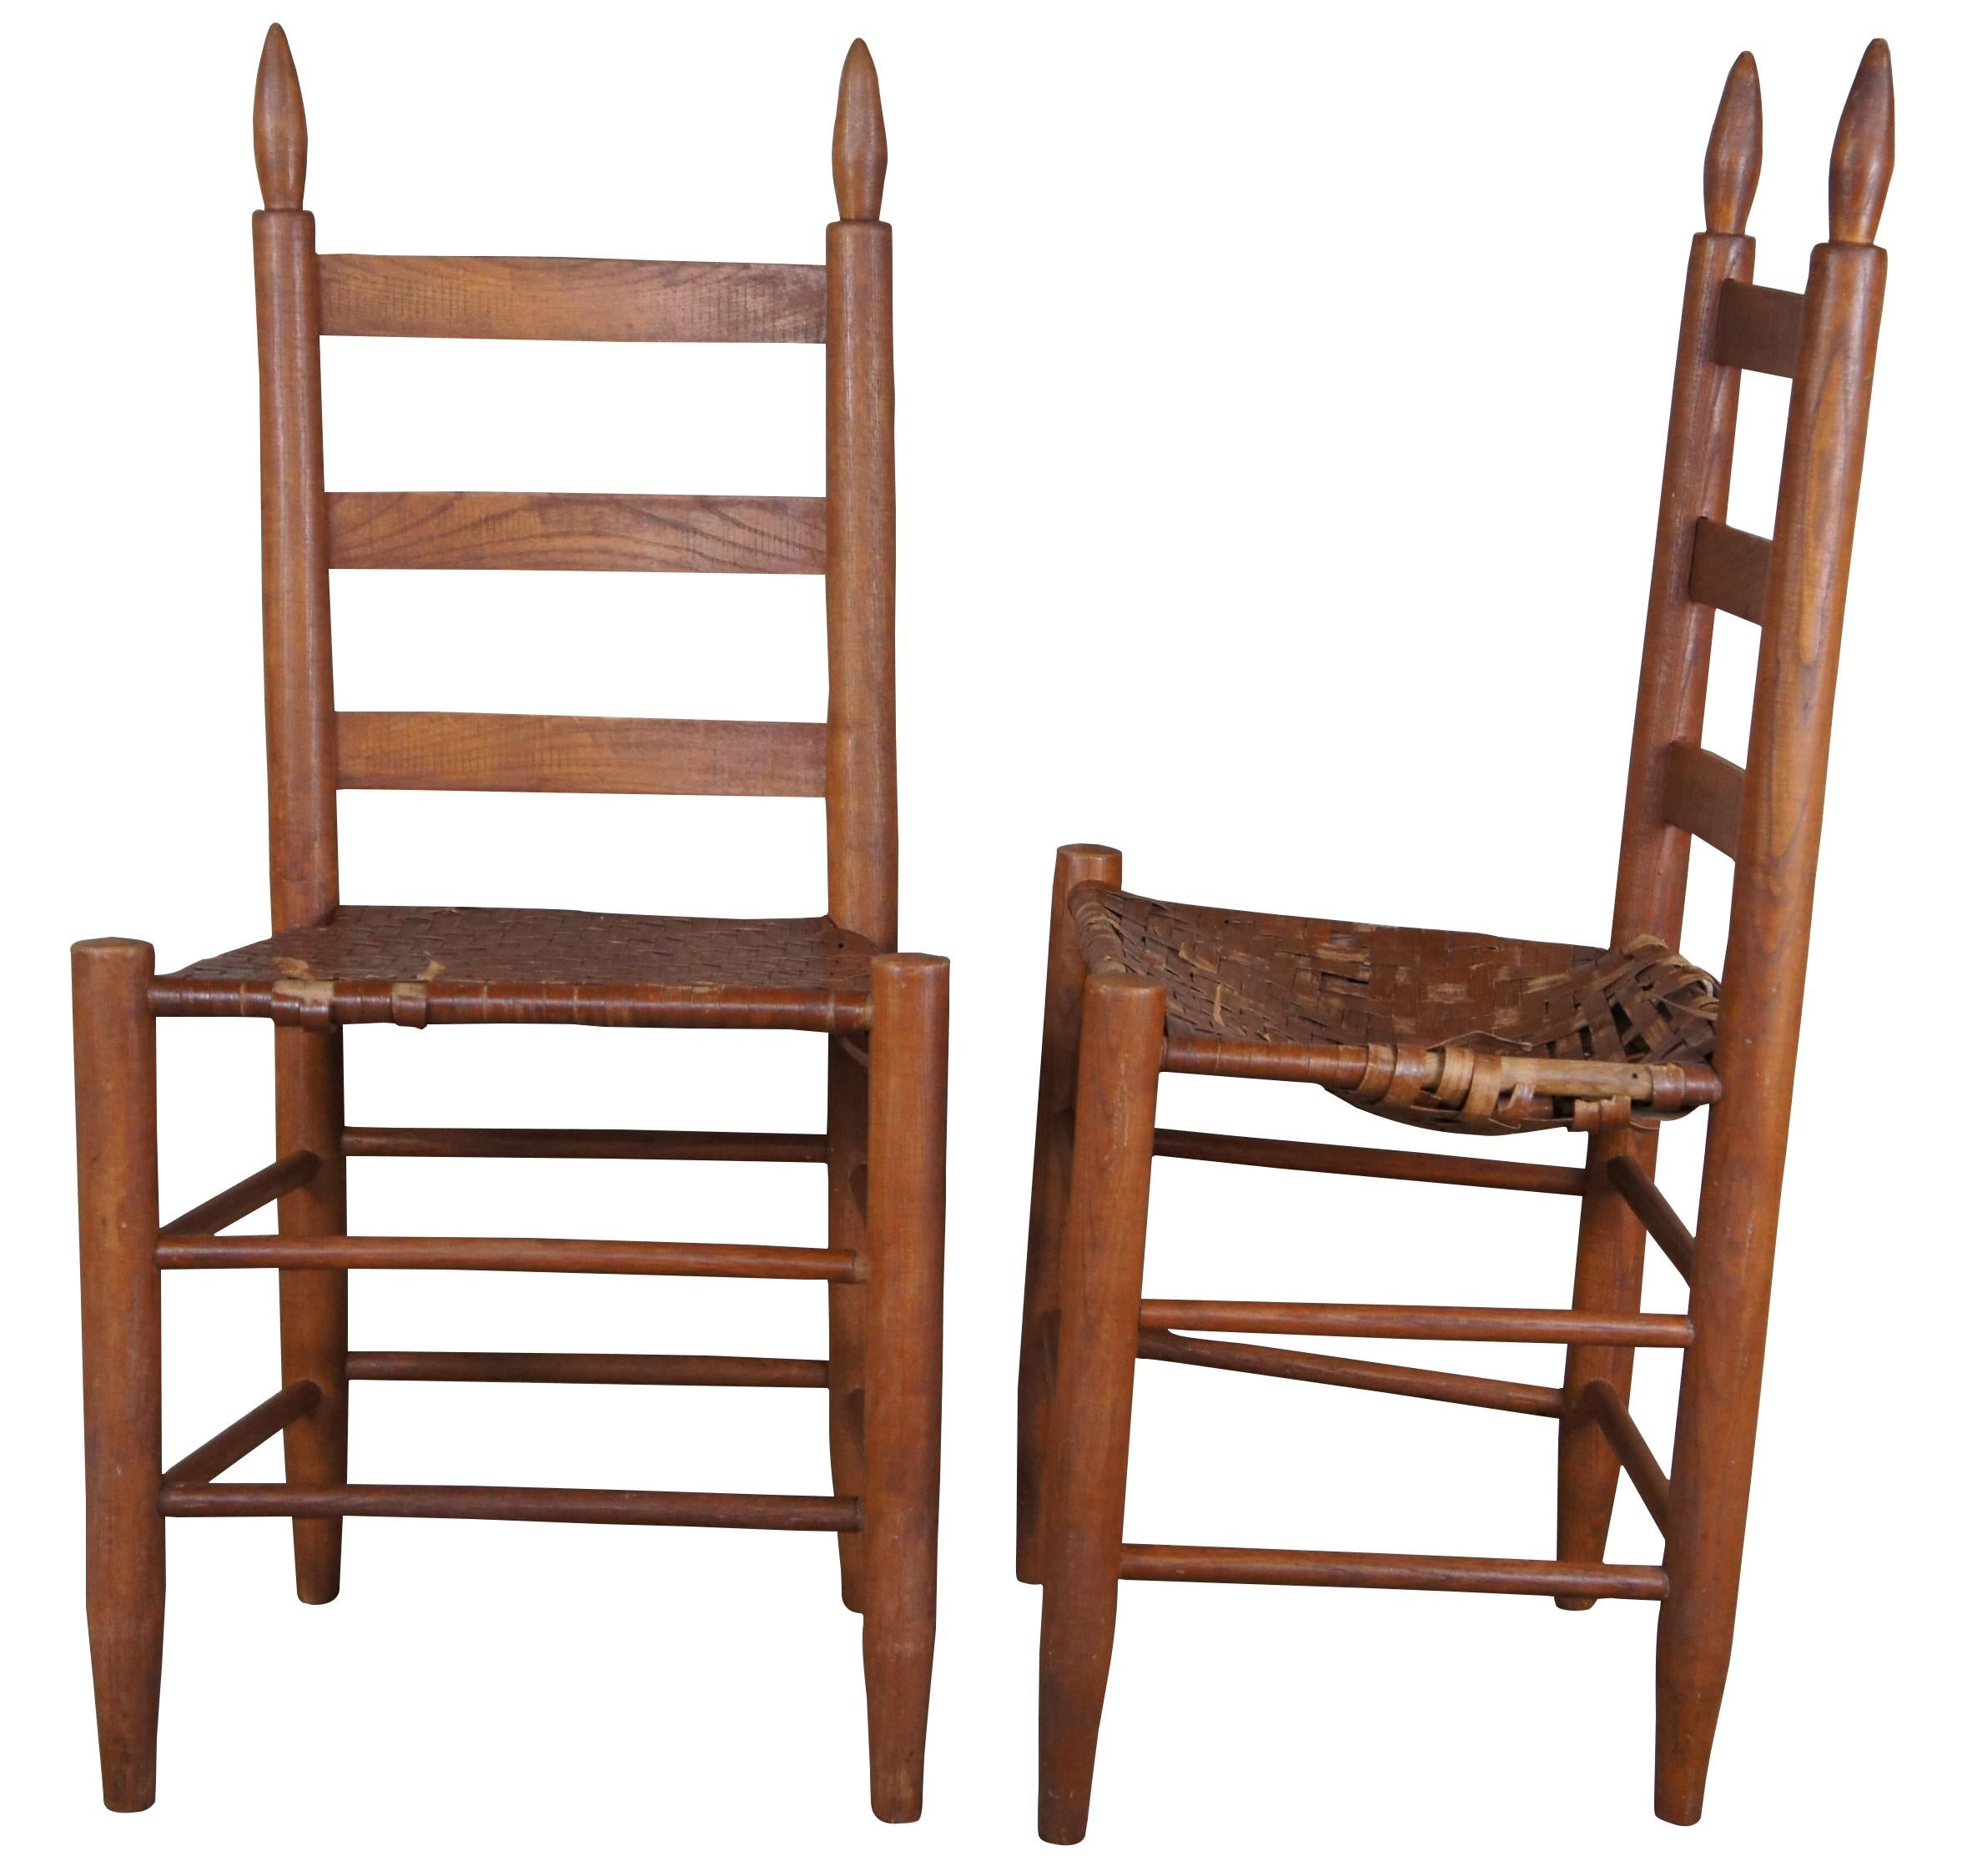 Four vintage pine early American style Shaker ladderback dining chairs featuring rush seats and tall finials.
 